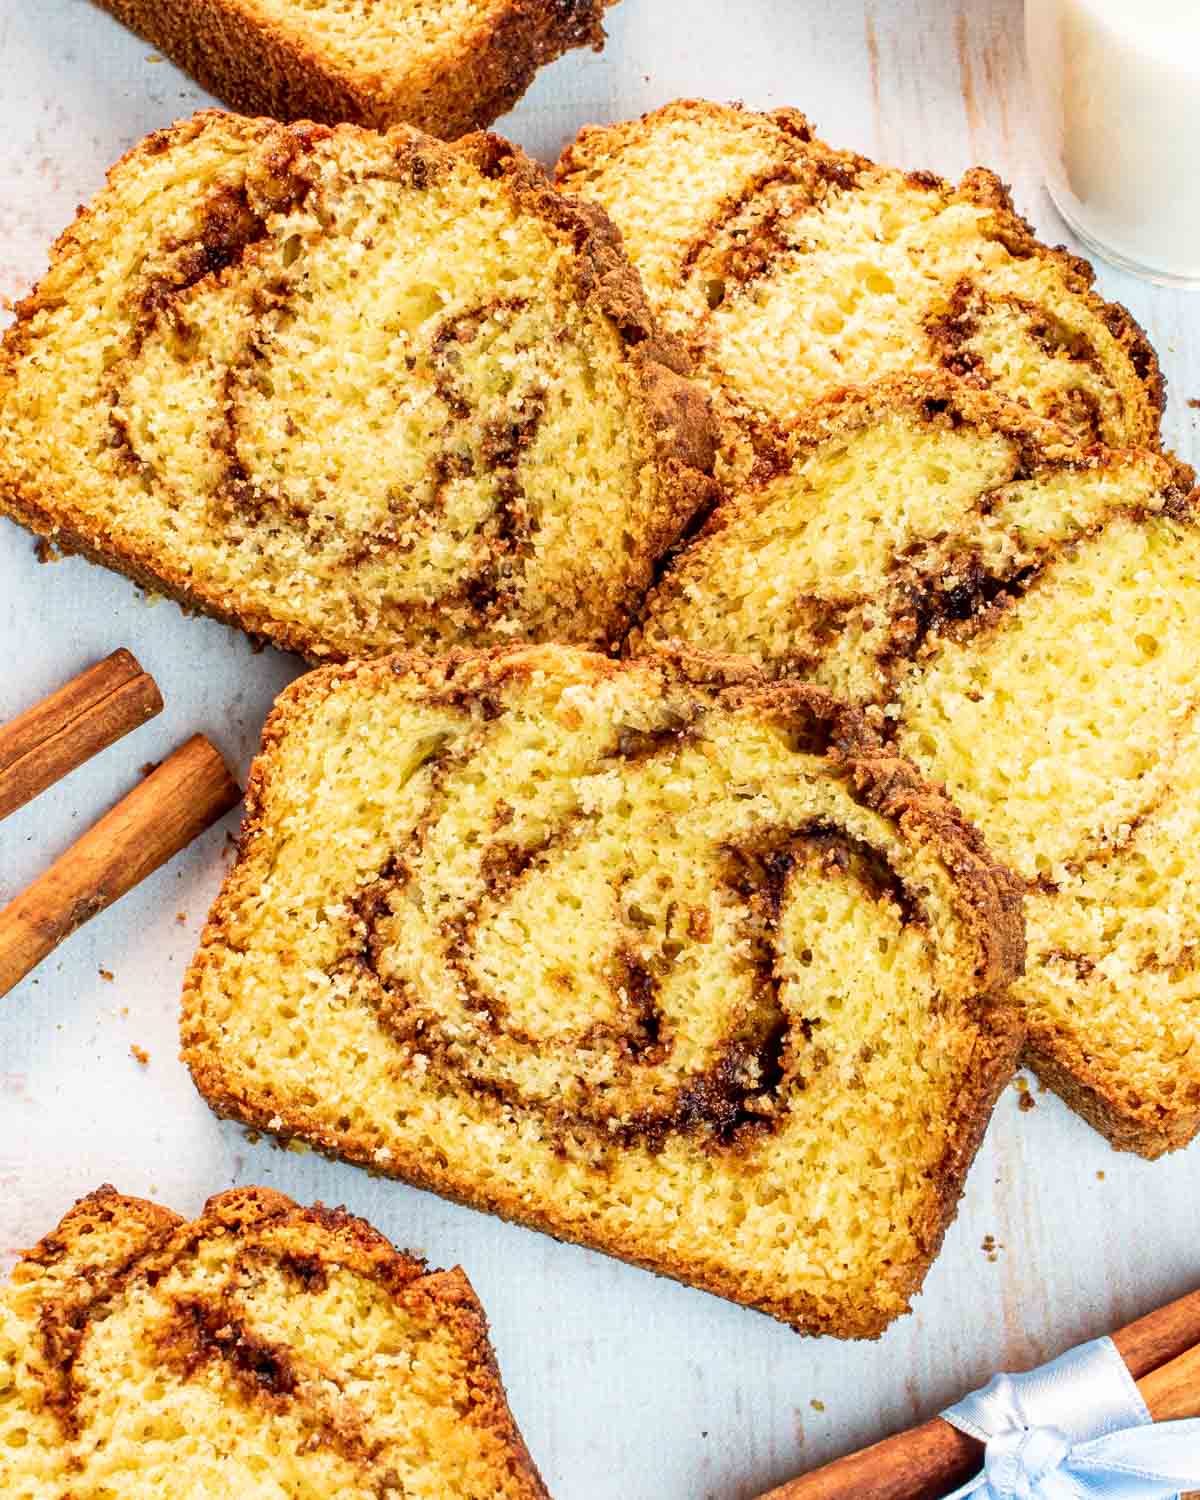 3 slices of cinnamon bread stacked together.